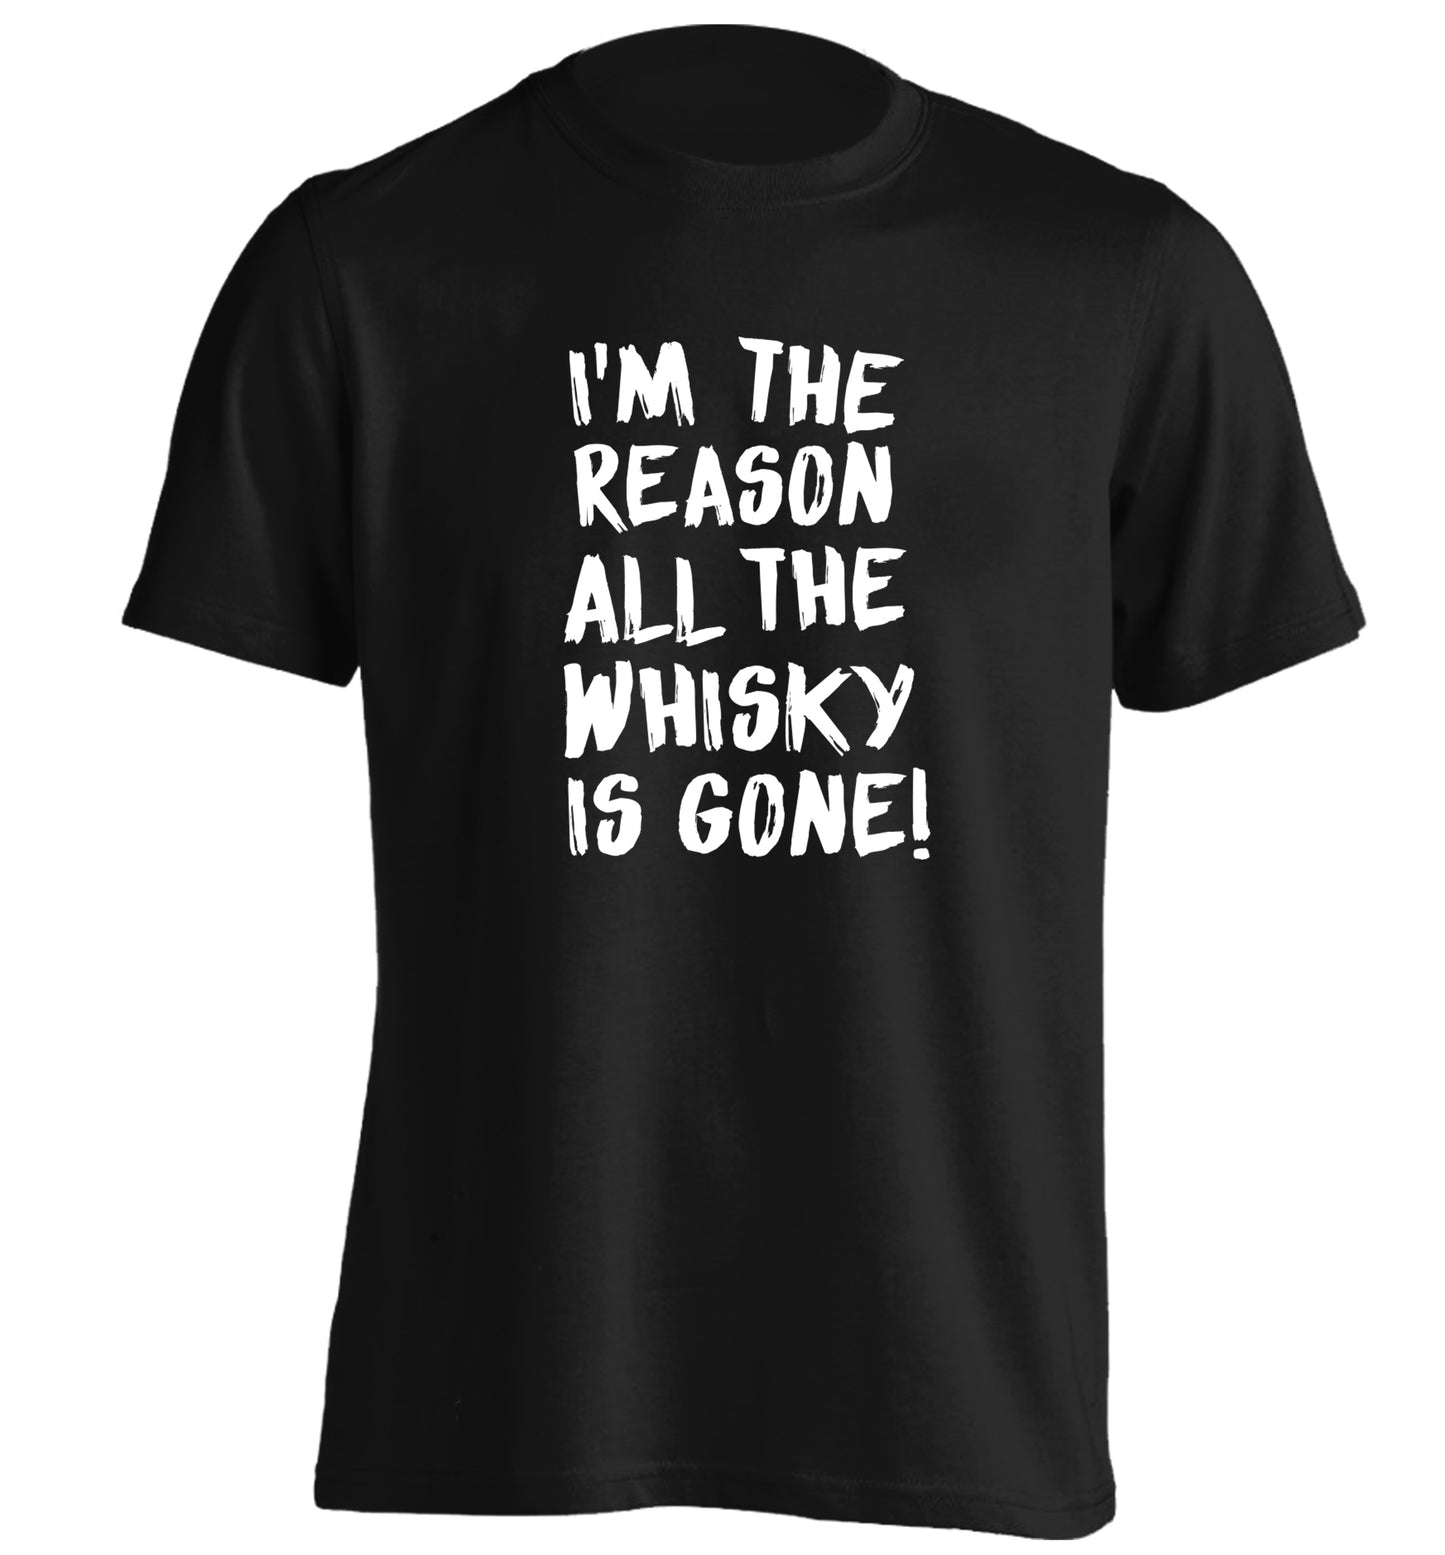 I'm the reason all the whisky is gone adults unisex black Tshirt 2XL